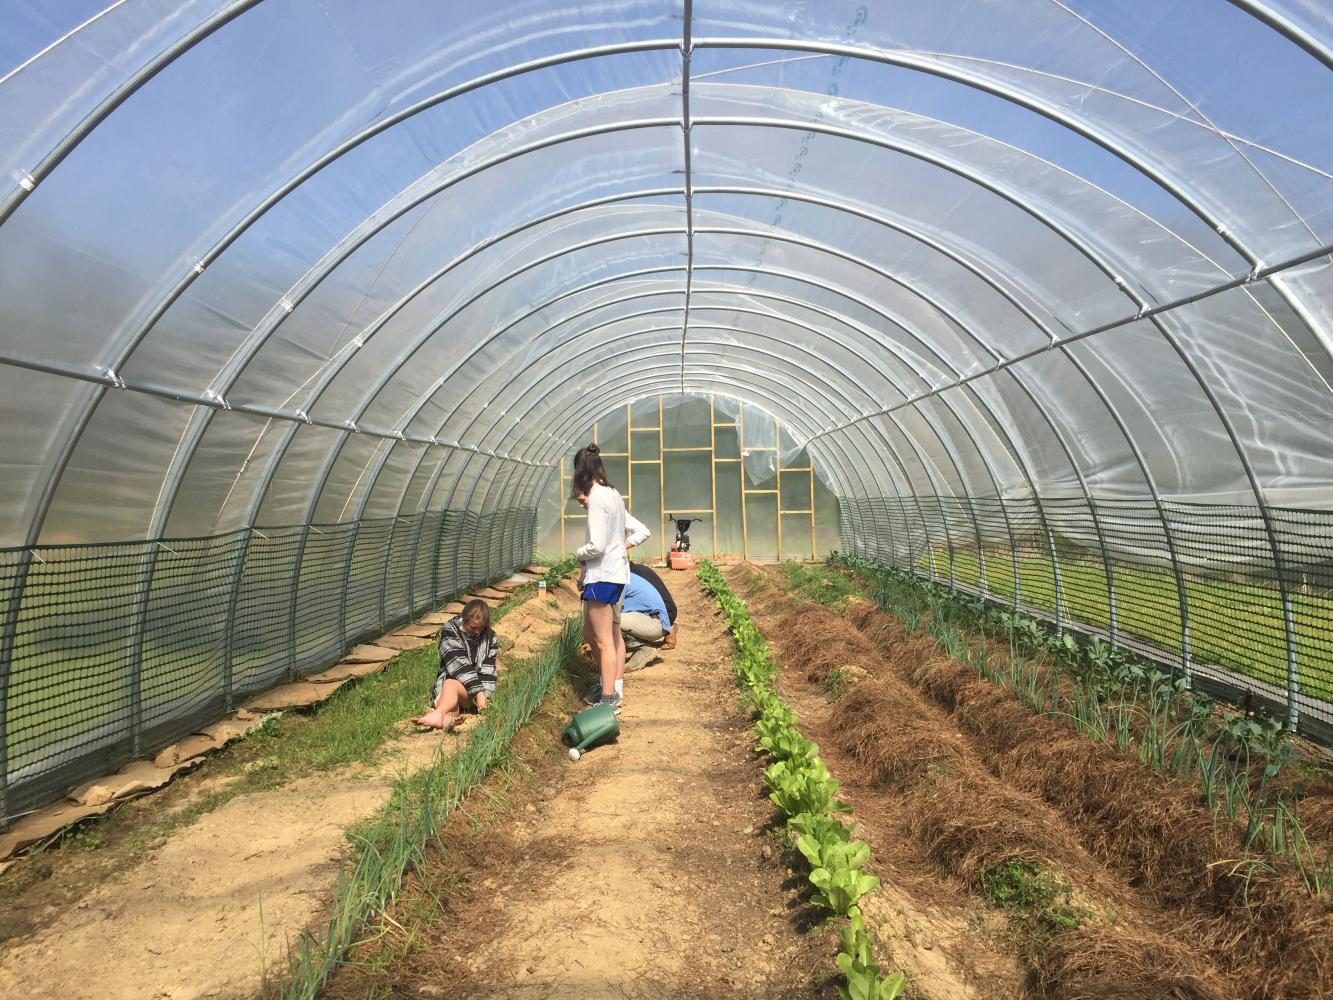 Students work in the hoop house. Students came face-to-face with the real-world challenges of running a small scale farm.